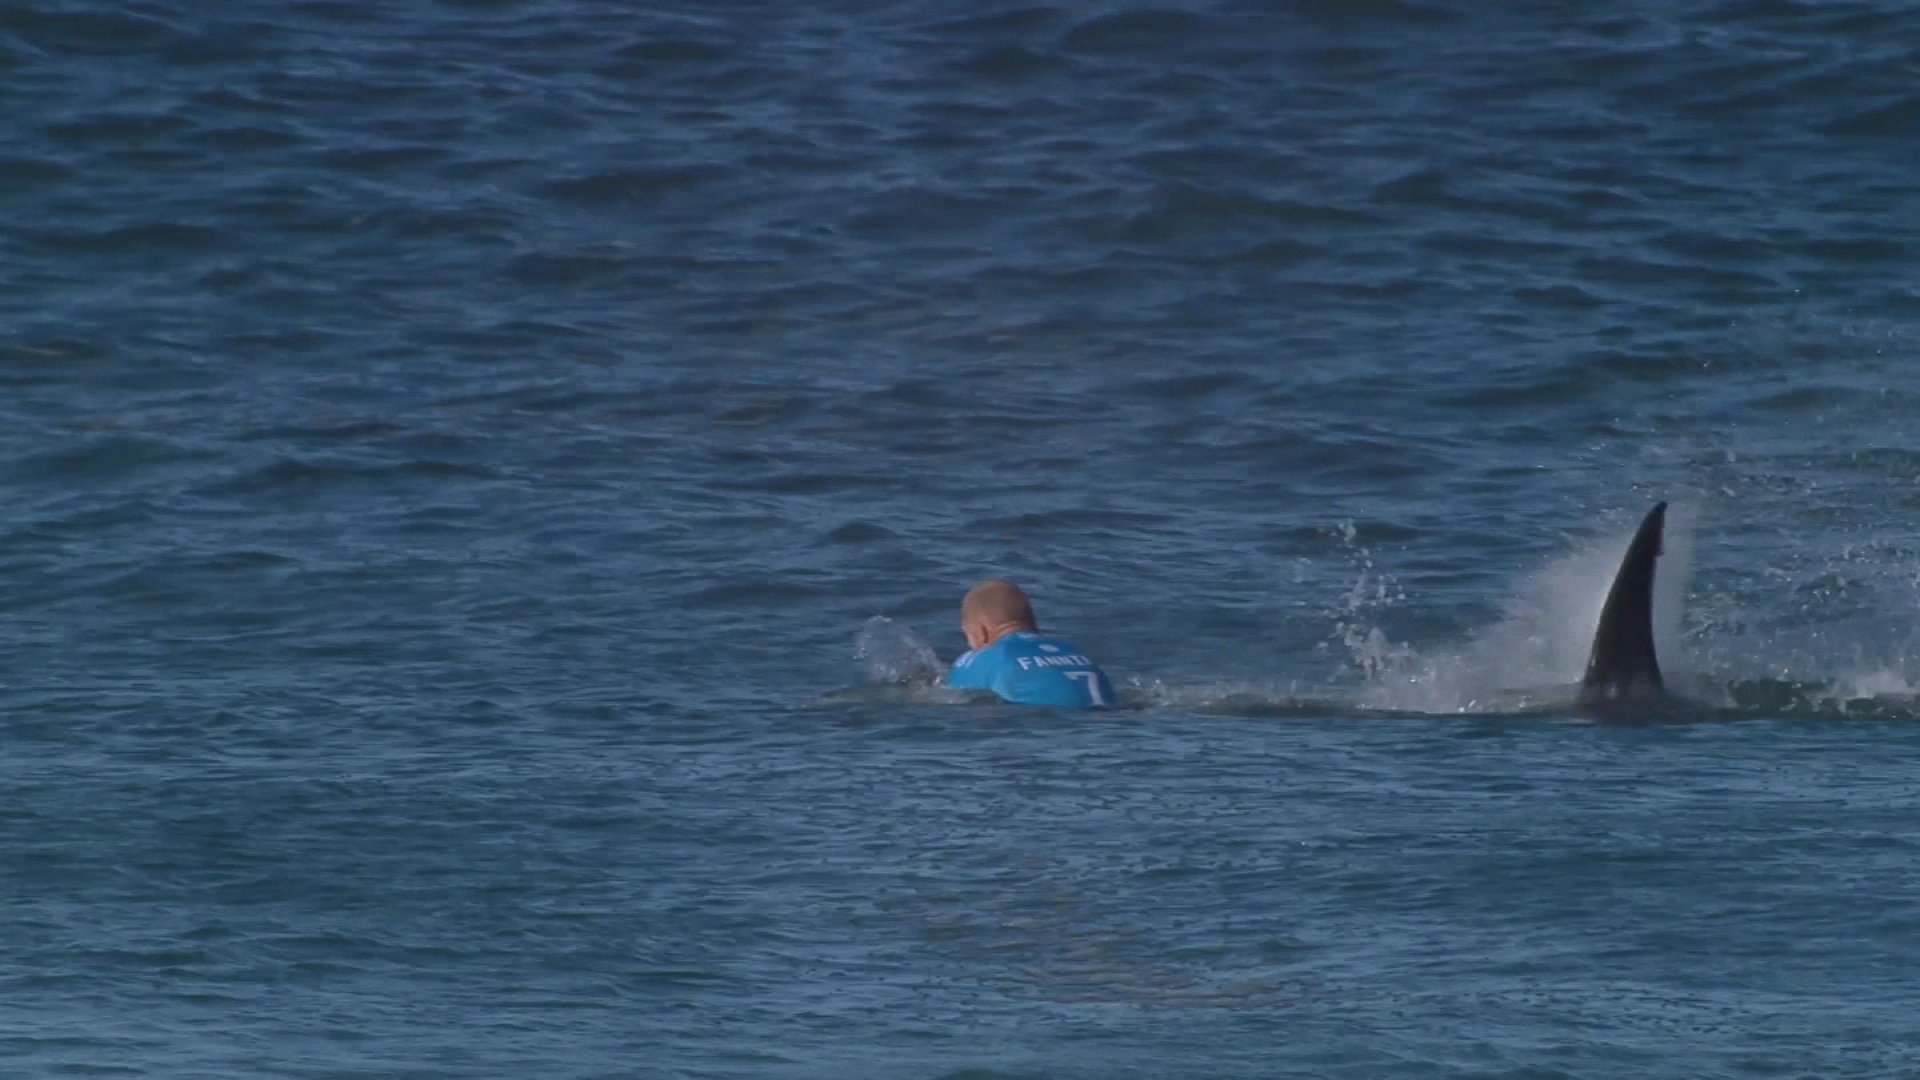 The near-miraculous escape of champion surfer Mick Fanning, who found himself under attack by a shark on Sunday off the coast of South Africa, has been seen by people around the world.